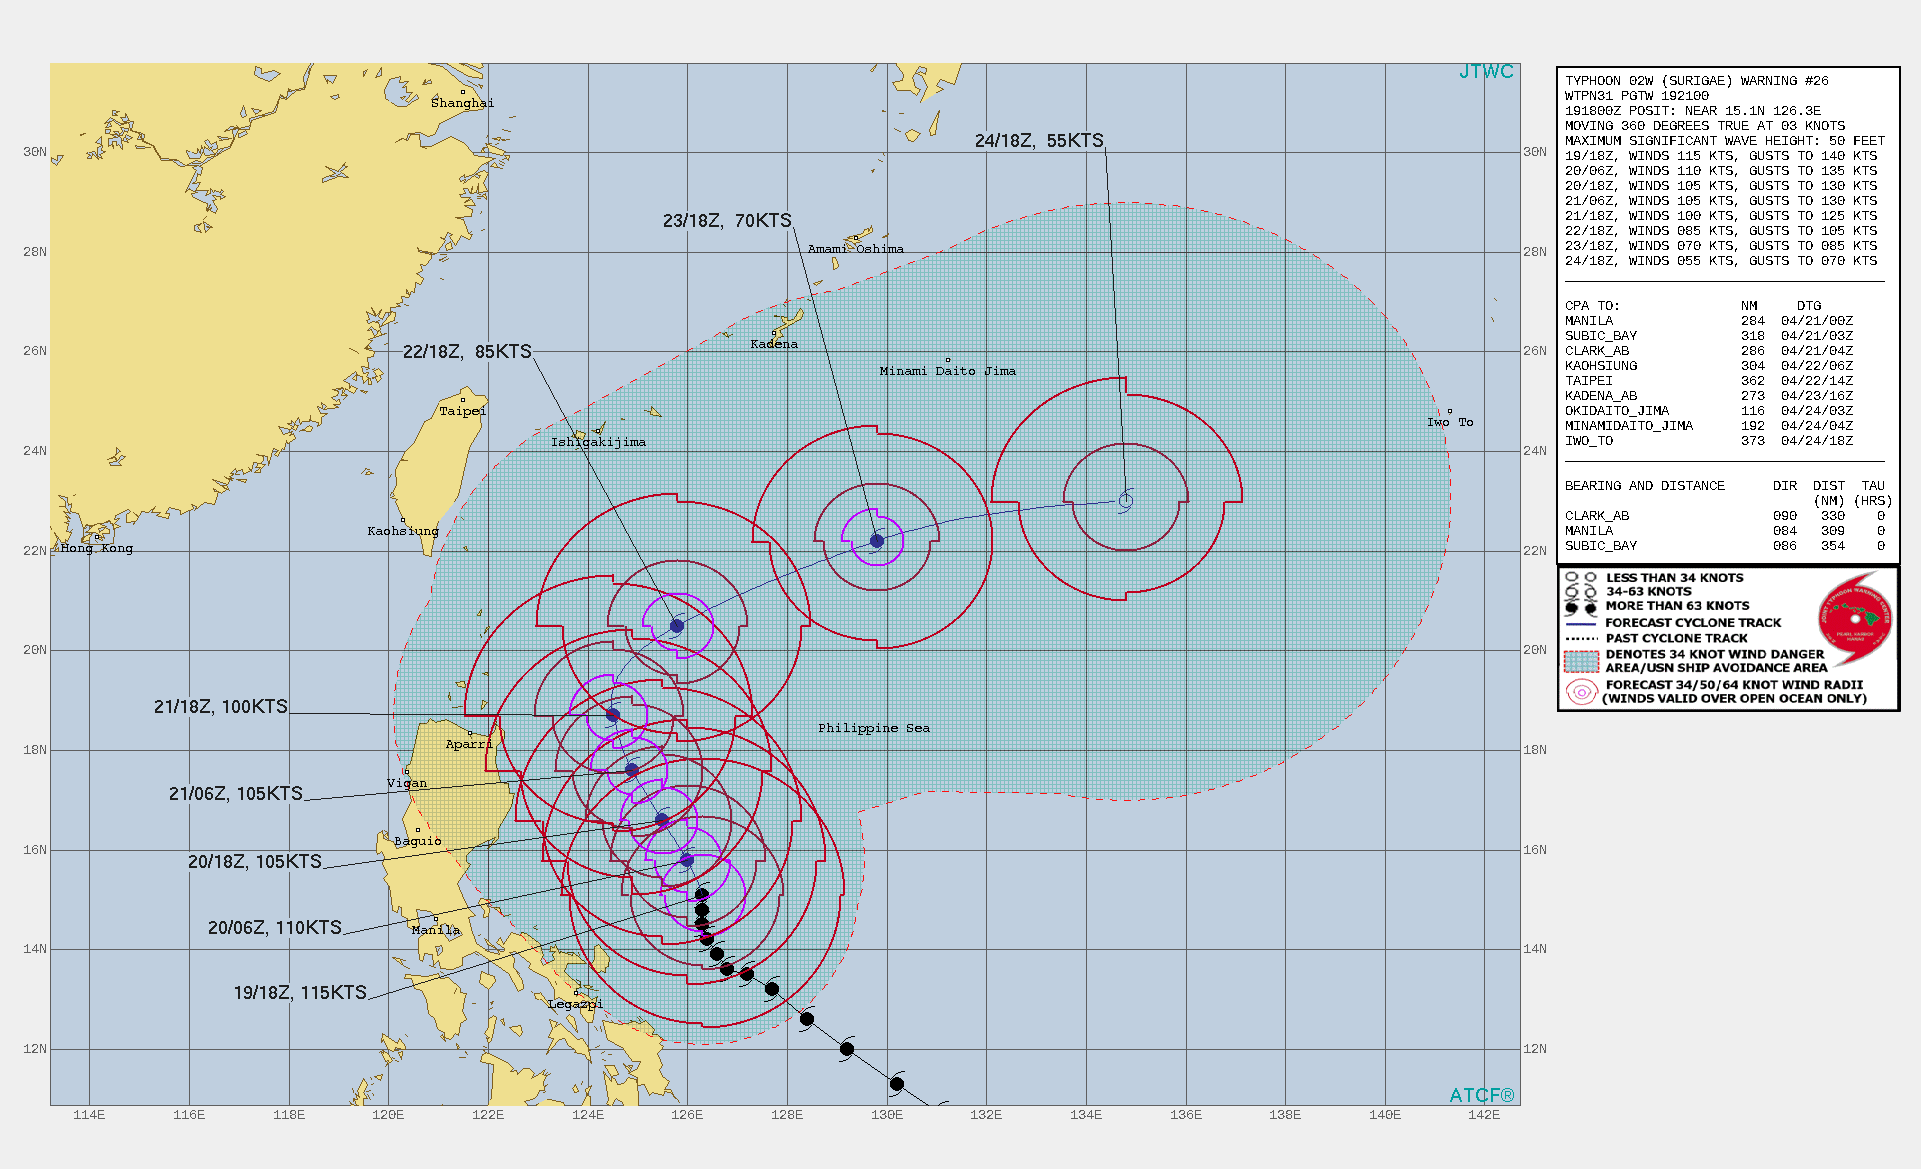 02W(SURIGAE). WARNING 26 ISSUED AT 19/21UTC.THE CURRENT INTENSITY IS LOWERED SLIGHTLY TO 115  KNOTS/CAT4, BASED ON THE PGTW FIX OF T6.0/6.5 AND ADT ESTIMATES OF T6.0.  COUPLED HWRF/HYCOM OCEAN ANALYSIS SUGGESTS THAT SLOW MOVEMENT OF THE  LARGE TYPHOON IS INDUCING COOLING OF THE UNDERLYING WATER, POSSIBLY  CONTRIBUTING TO THE CURRENT RAGGEDNESS OF INNER CORE CONVECTION AND  GRADUAL DECREASE IN INTENSITY. SURIGAE REMAINS SITUATED IN AN  OTHERWISE FAVORABLE ENVIRONMENT, LOCATED JUST SOUTH OF THE AXIS OF A  200MB RIDGE, WITH LIGHT VERTICAL WIND SHEAR OF 5-10 KTS. WATER VAPOR  SATELLITE IMAGERY DEPICTS A COOL, DRY MID-LATITUDE AIR MASS GETTING  PULLED SOUTHWARD OVER LUZON ON THE WEST SIDE OF THE TYPHOON, BUT  THERE IS NO EVIDENCE THAT THIS AIR MASS IS GETTING ENTRAINED INTO  THE STORM CORE AT THIS TIME.SURIGAE IS EXPECTED TO CONTINUE MOVING SLOWLY NORTH- NORTHWESTWARD DURING THE NEXT 48 HOURS AS A WEAK UPPER-LEVEL RIDGE  TO ITS EAST CONTINUES TO INDUCE A WEAK SOUTHERLY STEERING FLOW. THIS  STEERING FLOW MAY STRENGTHEN SLIGHTLY AS A LOW-AMPLITUDE UPPER-LEVEL  RIDGE WITHIN THE SUBTROPICAL JET (STJ) TRANSLATES EASTWARD FROM THE  VICINITY OF TAIWAN TO THE NORTH OF THE TYPHOON. THUS, FORWARD SPEED  IS EXPECTED TO INCREASE SLIGHTLY FROM THE CURRENT SLOTHFUL PACE  WITHIN THE NEXT 12-24 HOURS. AFTER 48 HOURS, SURIGAE WILL ROUND THE  NORTHWESTERN PERIPHERY OF THE RIDGE TO ITS EAST, AND A SHORTWAVE  TROUGH WILL APPROACH FROM THE NORTHWEST OVER EASTERN CHINA. THE  RESULTING INCREASE IN MID-LEVEL WESTERLY FLOW WILL ACCELERATE AND  TURN THE CYCLONE NORTHEASTWARD BY 72 HOURS. THE TRACK FORECAST  THROUGH 72 HOURS IS NUDGED SLIGHTLY EASTWARD COMPARED TO THE  PREVIOUS ONE TO ACCOUNT FOR THE MORE NORTHWARD TREND IN SHORT-TERM  MOTION, BUT REMAINS OF HIGH CONFIDENCE. THE INTENSITY FORECAST  THROUGH 48 HOURS IS EXPECTED TO LARGELY BE A FUNCTION OF DYNAMIC  OCEAN COOLING OCCURRING BENEATH SURIGAE, WHICH SHOULD CONTINUE AS  THE TYPHOON MOVES SLOWLY. GRADUAL WEAKENING TO 100 KNOTS/CAT3 IS FORECAST  BY 48 HOURS. THEREAFTER, VERTICAL WIND SHEAR IS EXPECTED TO INCREASE  AS THE TYPHOON TURNS NORTHEASTWARD, IN RESPONSE TO INCREASING  WESTERLY MID-LEVEL FLOW AND A COOLING OF BACKGROUND SEA SURFACE  TEMPERATURES FROM 28C TO AROUND 26C. QUICKER WEAKENING IS LIKELY  AFTER 48 HOURS AS THIS OCCURS.DURING THE 96-120 HOUR PERIOD, SURIGAE IS EXPECTED TO INTERACT  WITH A STRONG LOW-LEVEL BAROCLINIC ZONE SOUTH OF JAPAN, PRESSING  SOUTHWARD ACROSS THE RYUKYU ISLANDS. THIS SHOULD CATALYZE THE  PROCESS OF EXTRATROPICAL TRANSITION. WEAKENING BELOW TYPHOON  INTENSITY IS FORECAST THROUGH 120 HOURS, AS THE INTERACTION WITH THE  STJ IS NOT PARTICULARLY FAVORABLE FOR BAROCLINIC-INDUCED  REINTENSIFICATION AS A POSITIVELY-TILTED SHORTWAVE TROUGH DIGS  THROUGH THE EAST CHINA SEA DUE WEST OF THE CYCLONE.